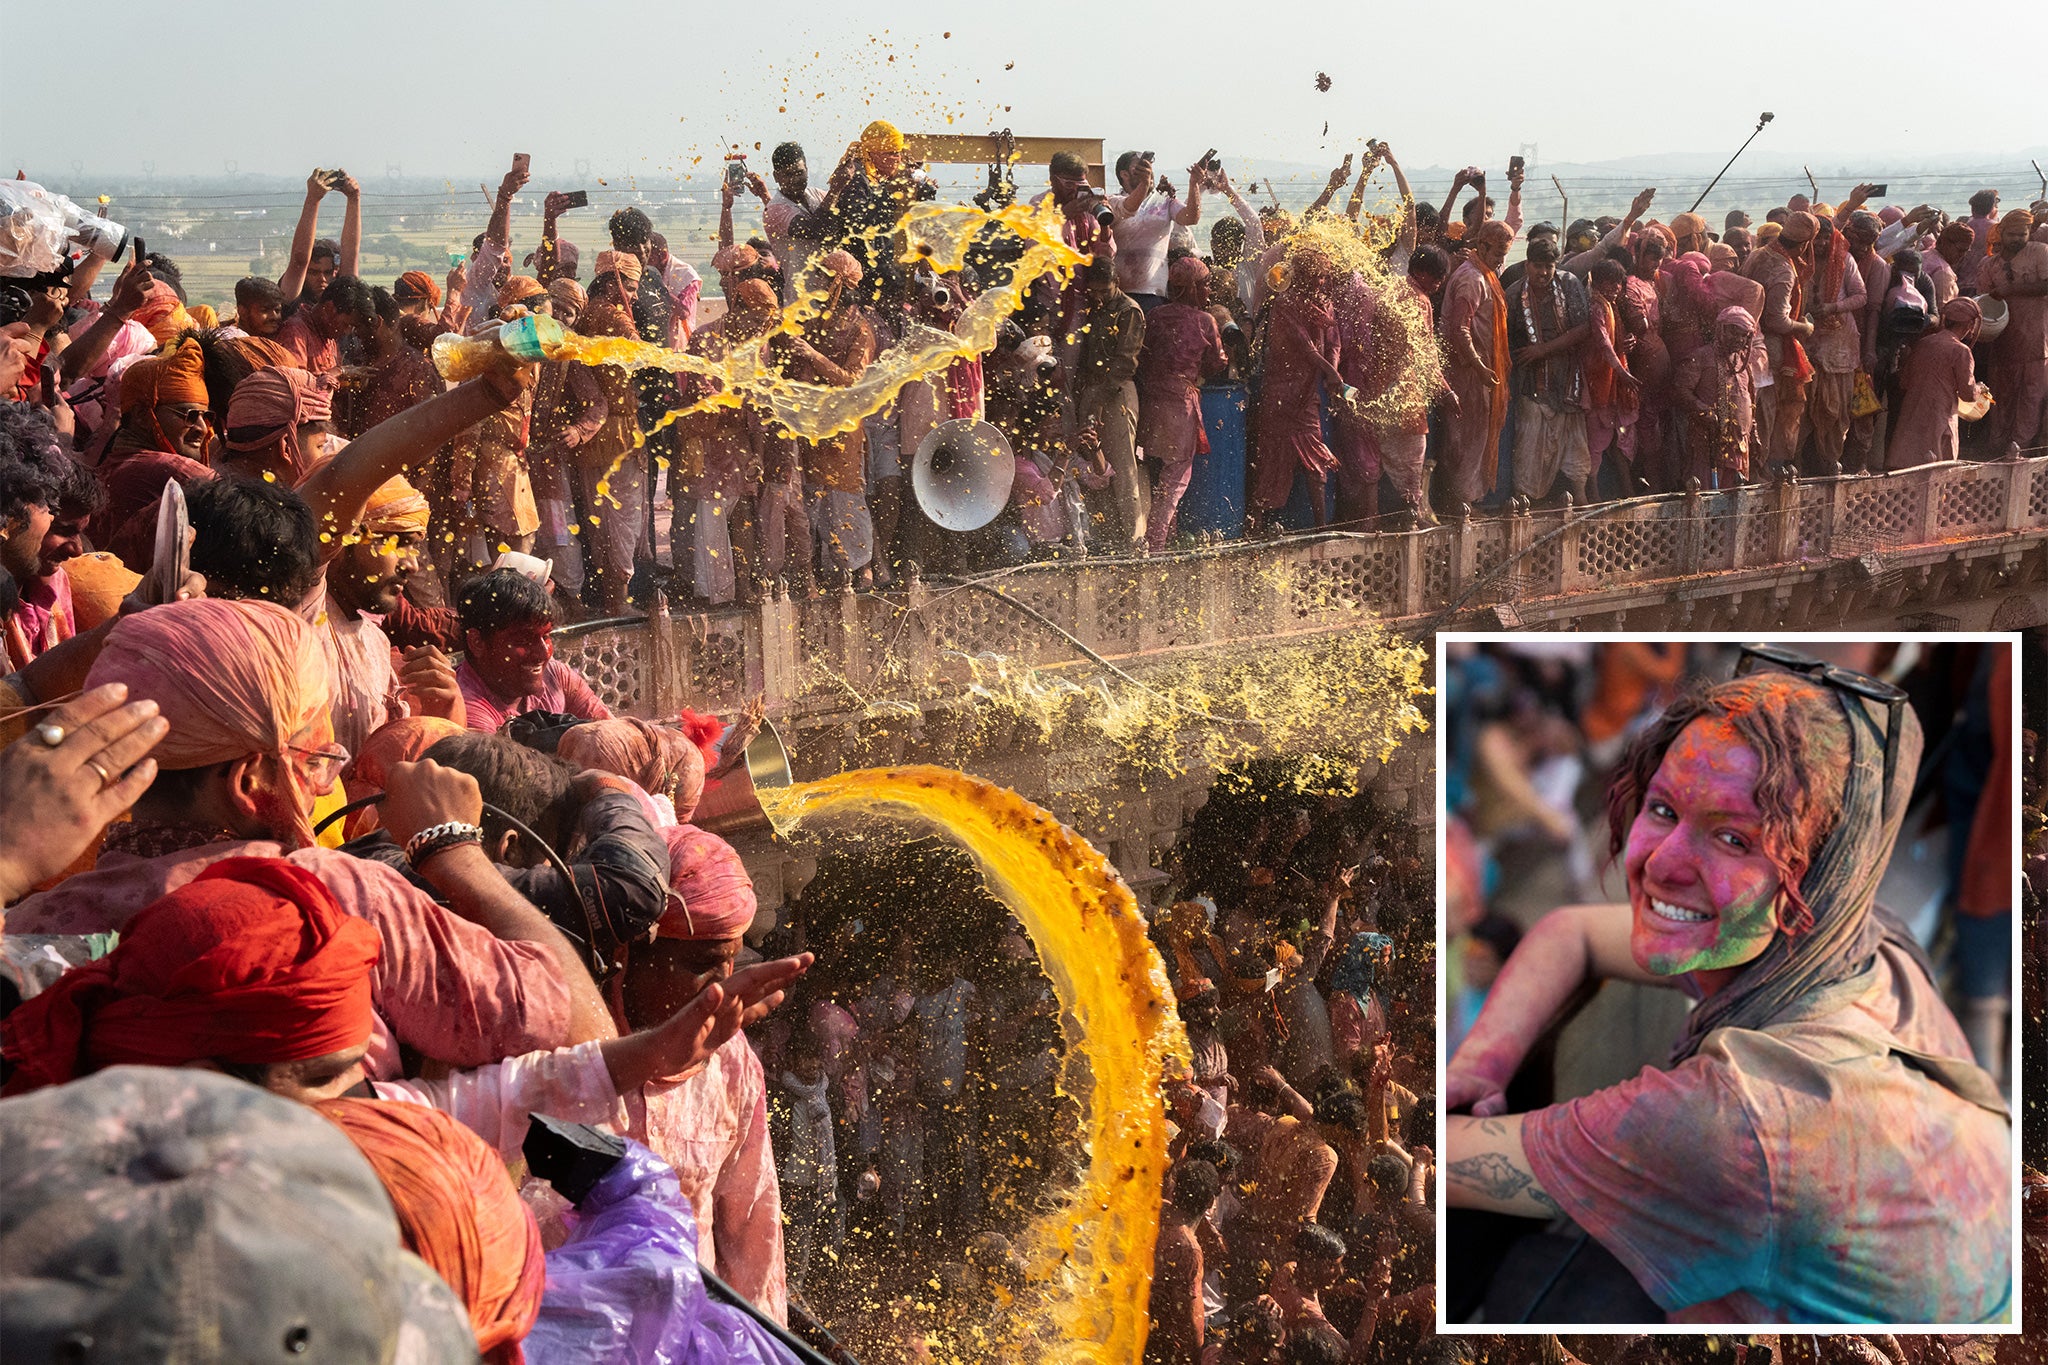 During Holi, buckets of dyed water, flowers and colourful powder are thrown over crowds